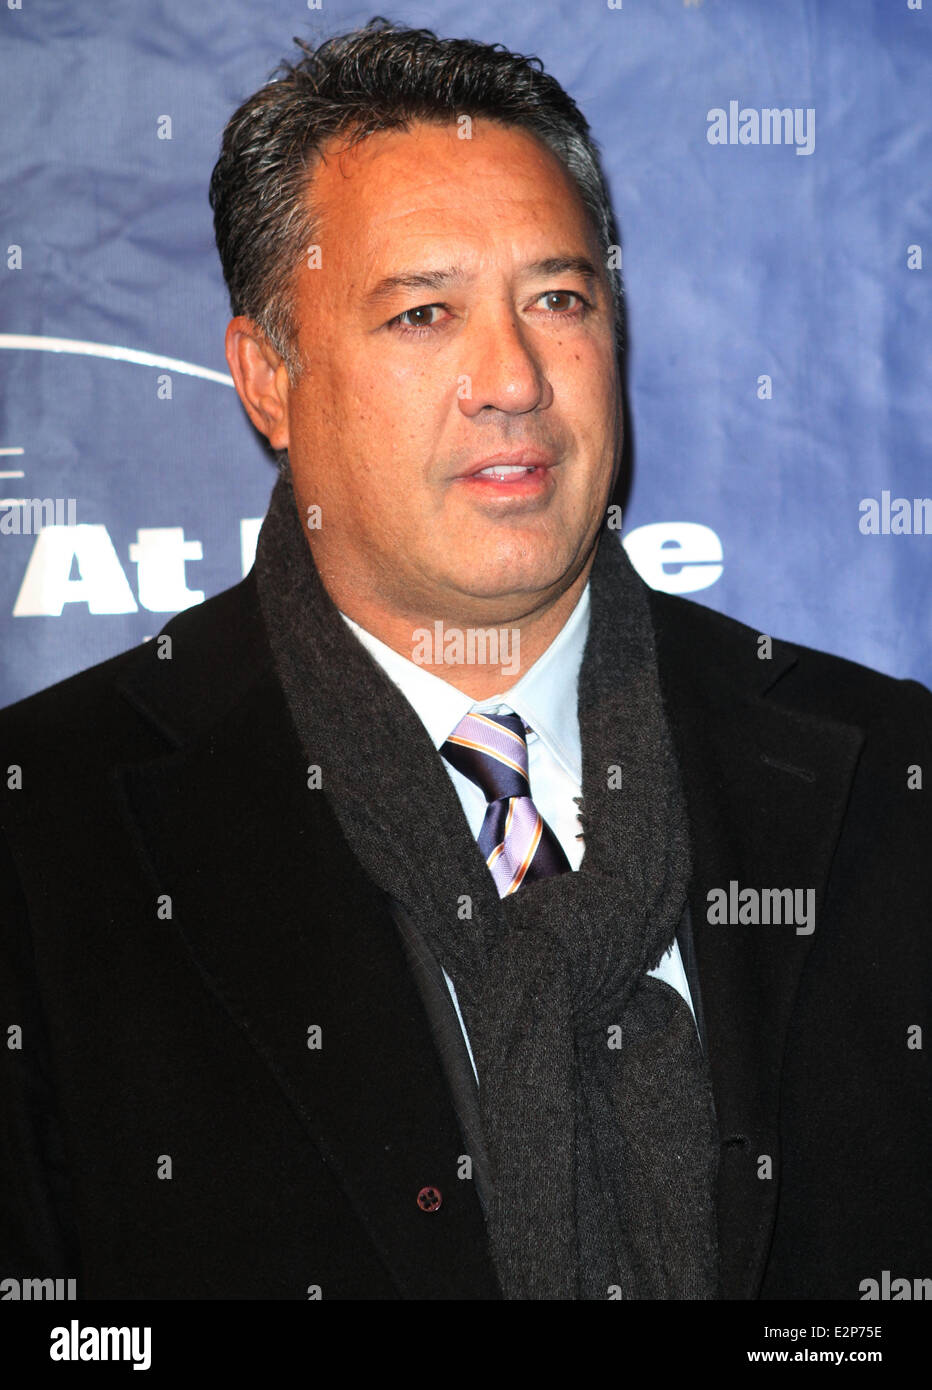 89 Ron darling Stock Pictures, Editorial Images and Stock Photos